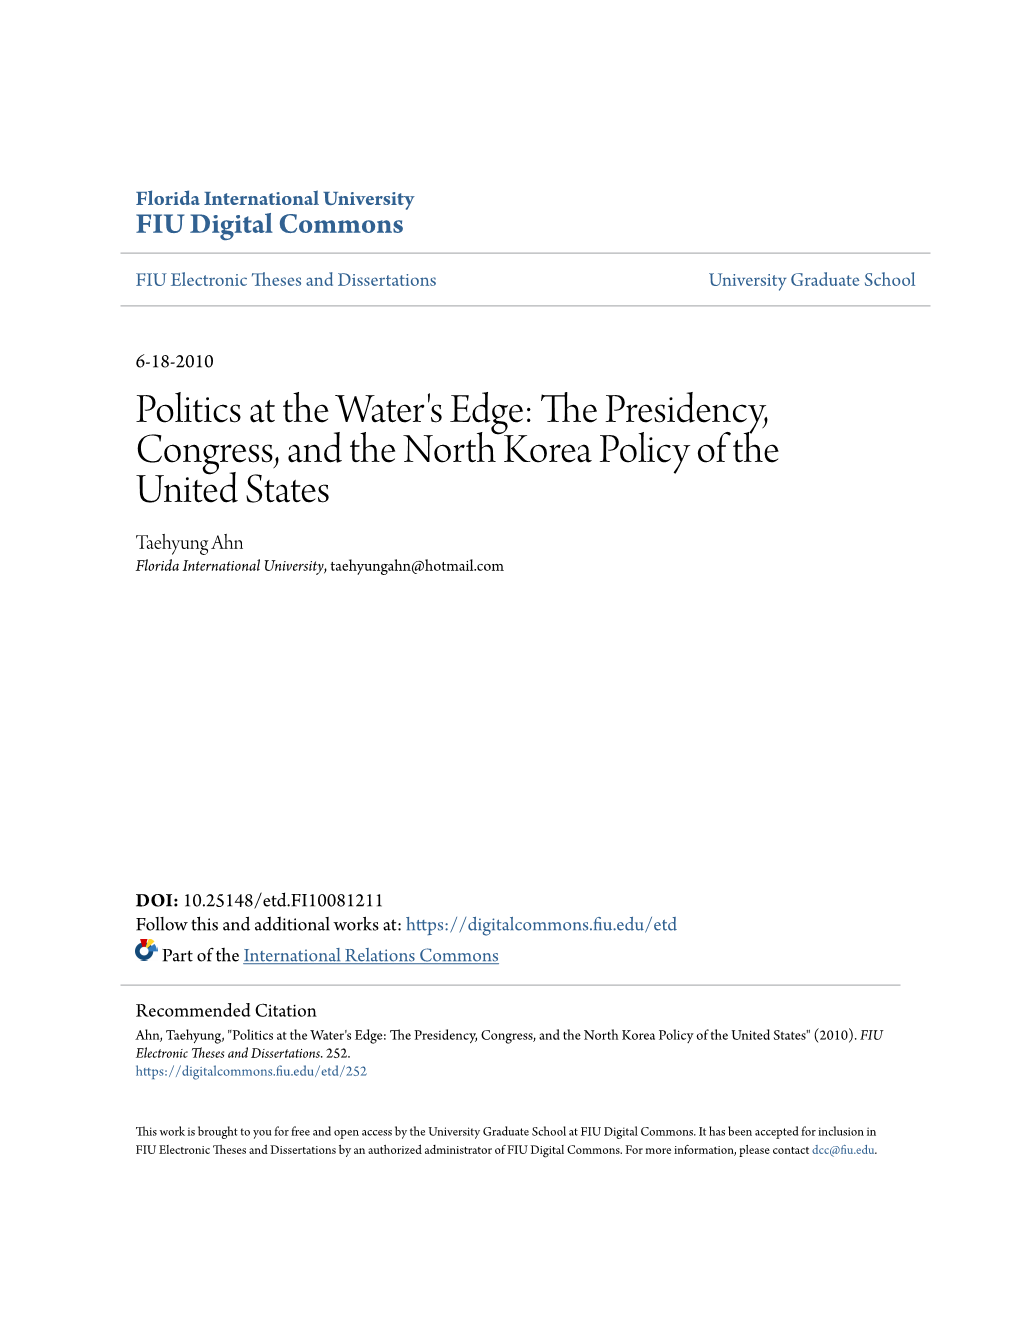 Politics at the Water's Edge: the Presidency, Congress, and The